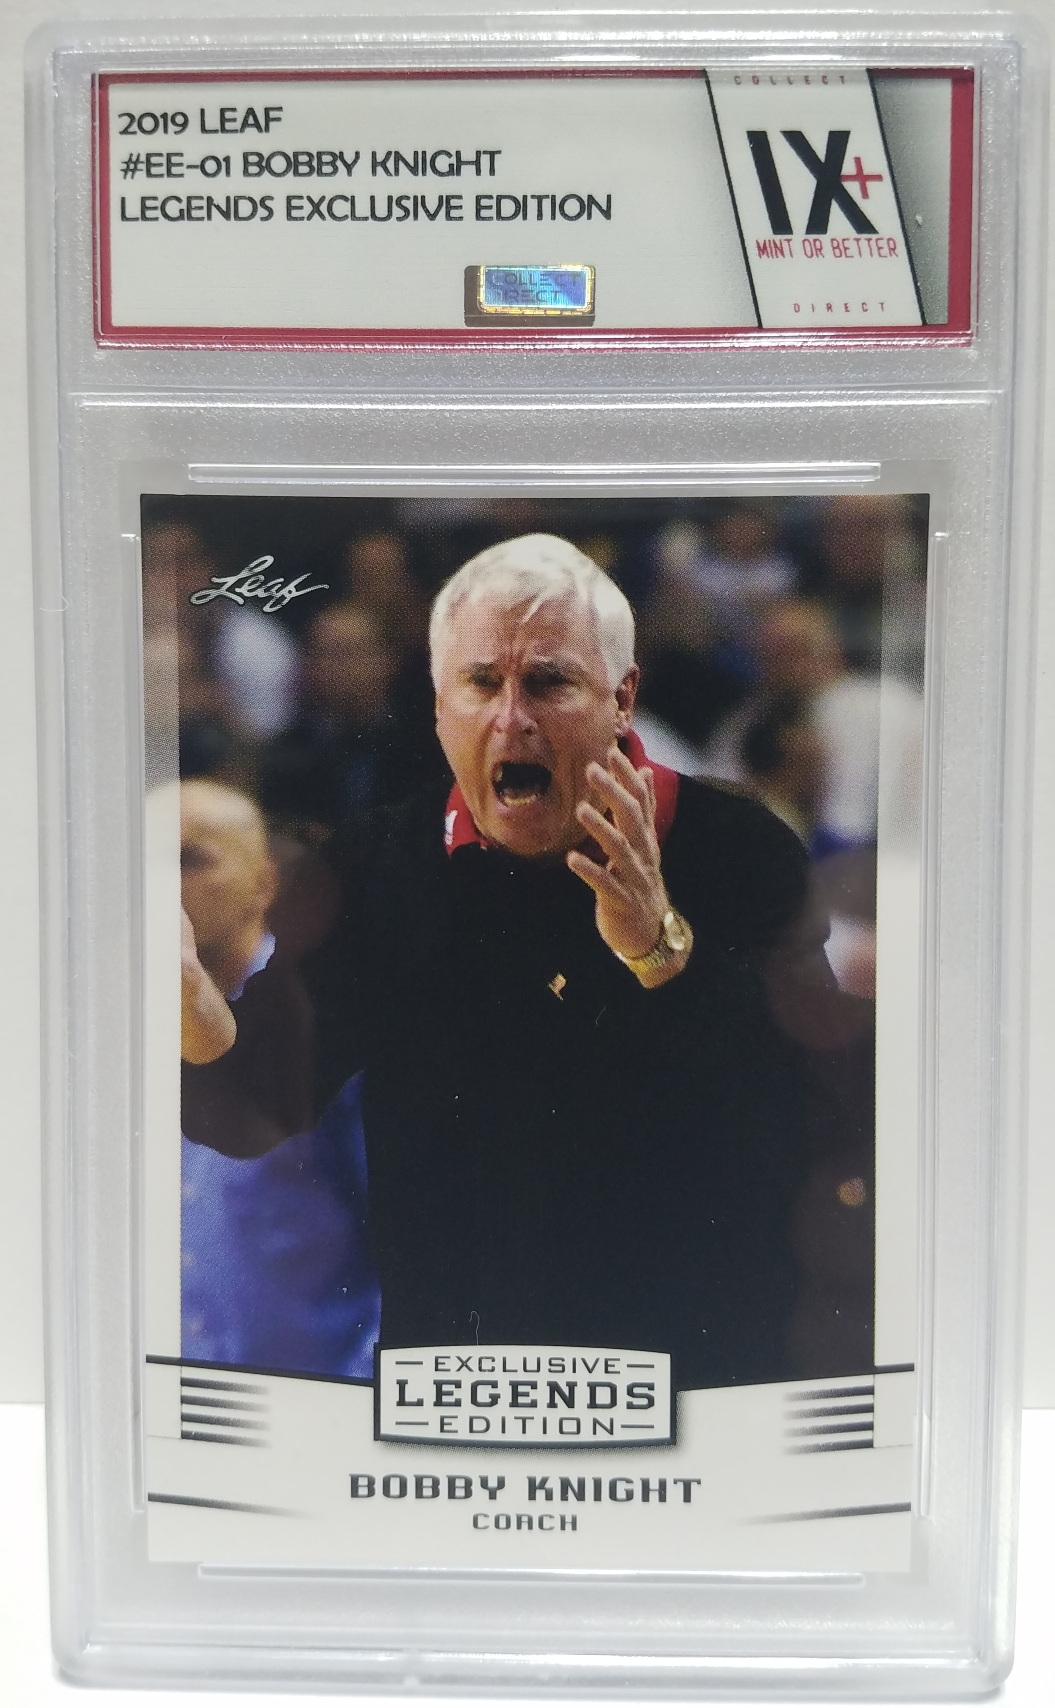 BOBBY KNIGHT 2019 Leaf Legends Exclusive Edition LEGEND COACH Indiana Hoosiers 3 NCAA Titles Goat Collect Direct Graded Mint Or Better Grade